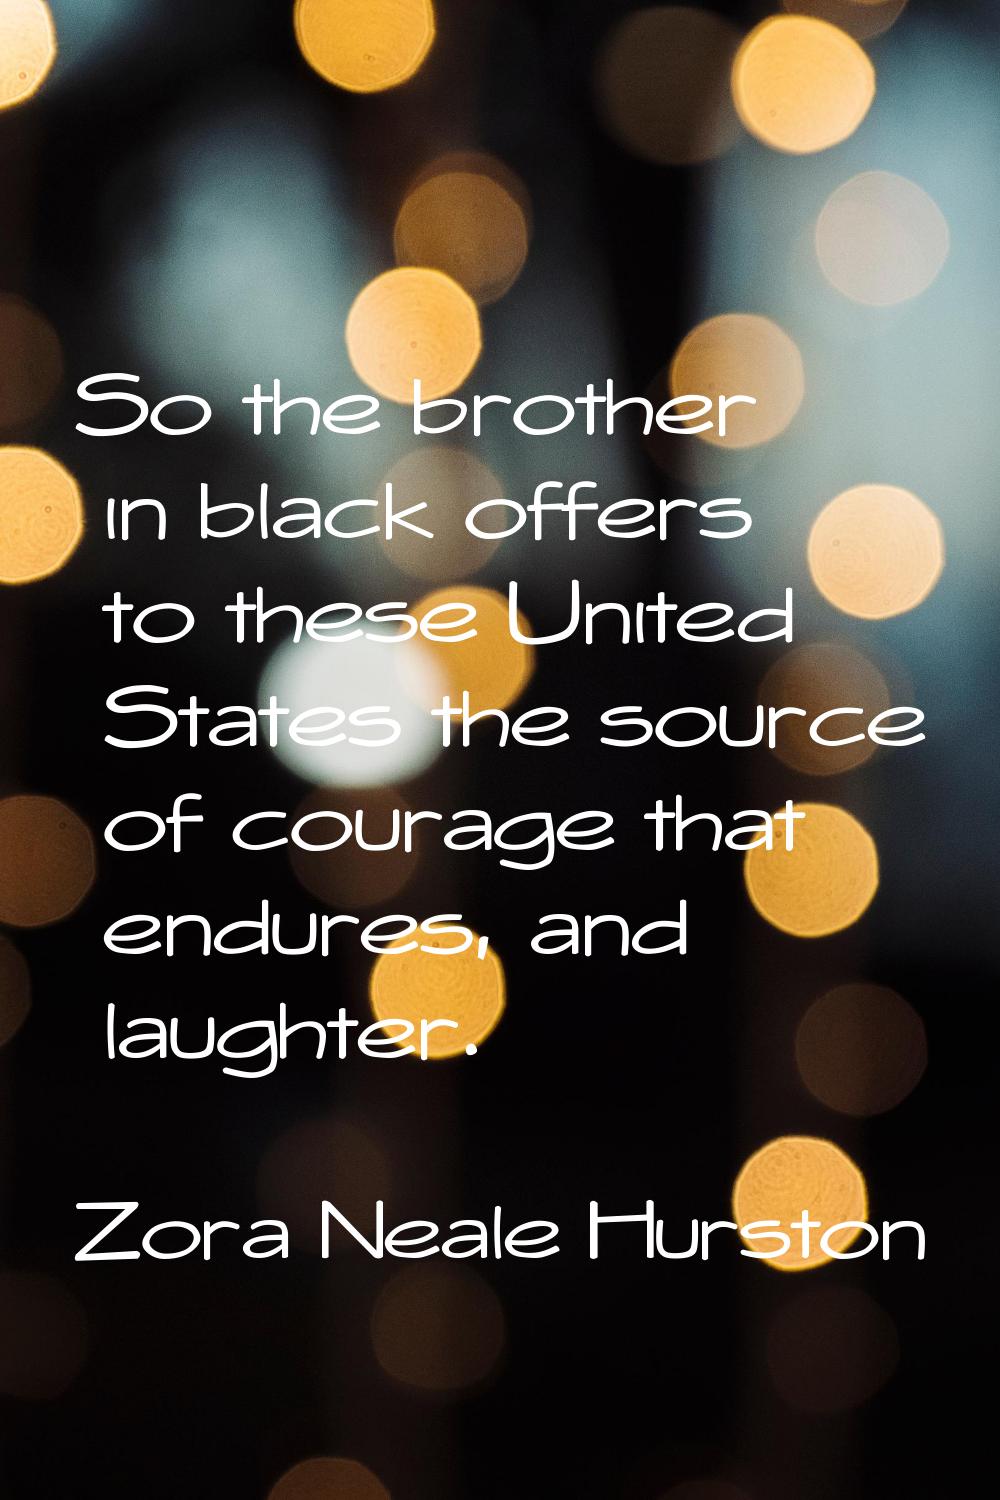 So the brother in black offers to these United States the source of courage that endures, and laugh